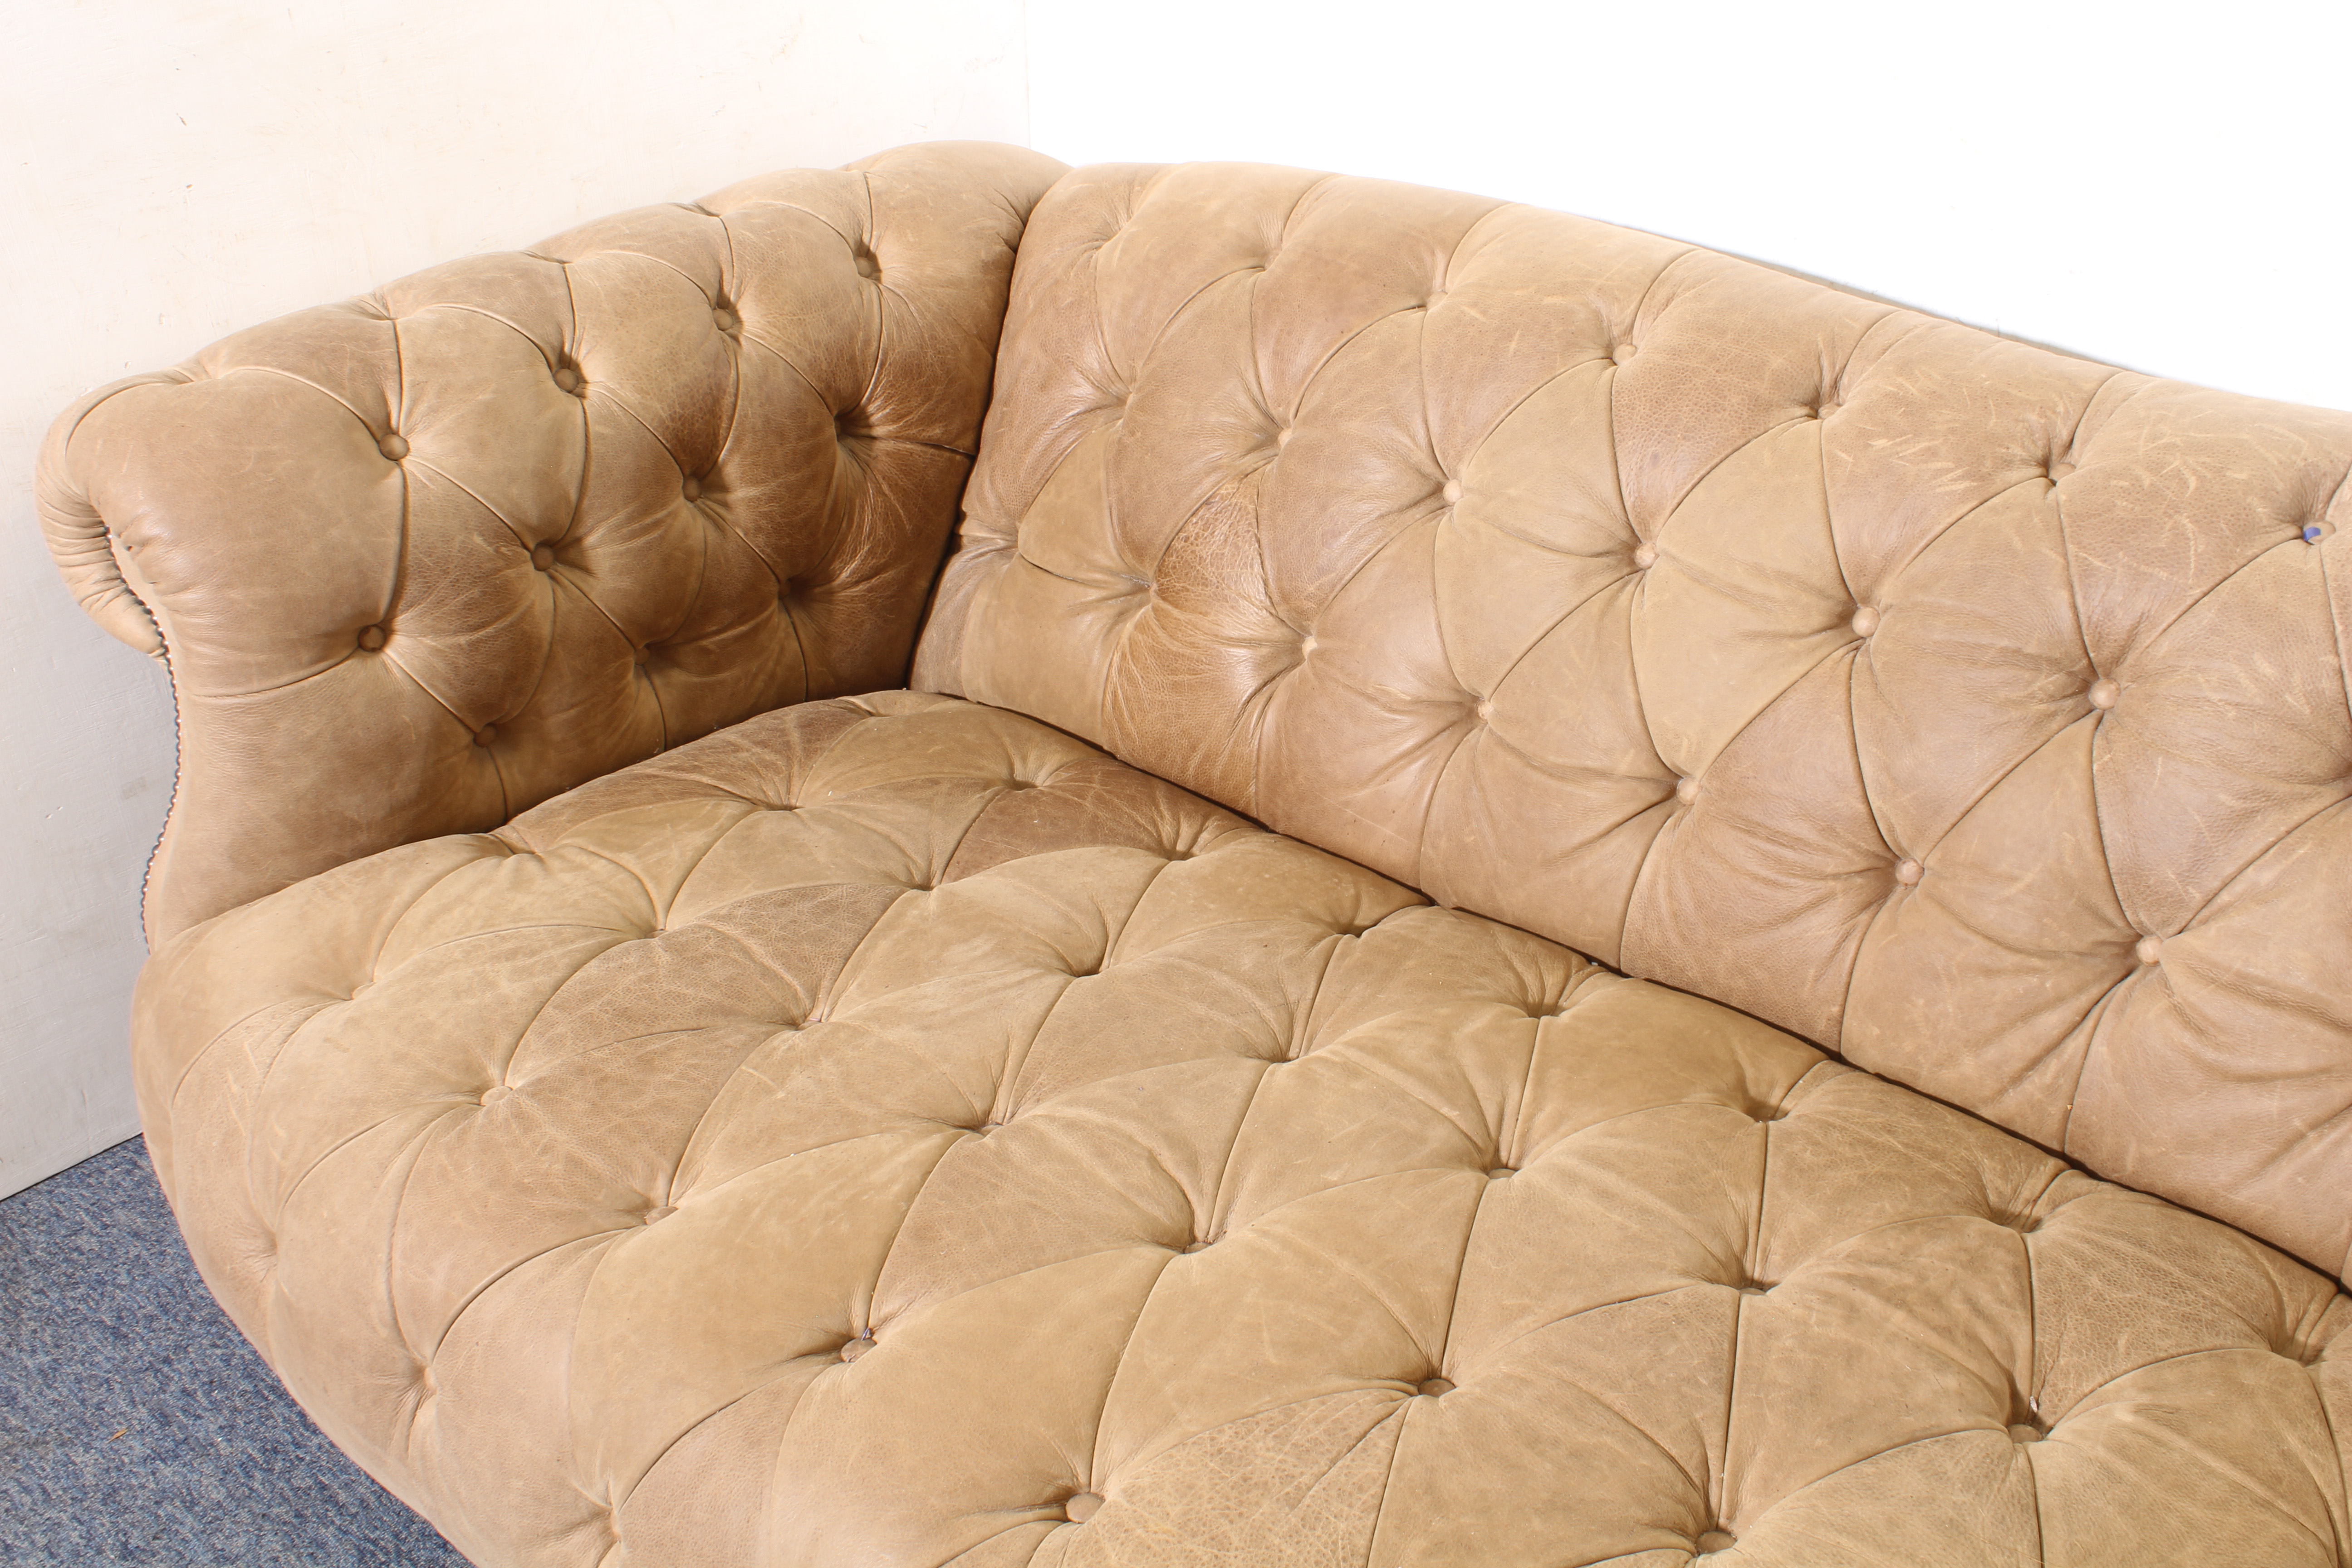 A leather Chesterfield three-seater sofa - modern, in soft pale-brown grained leather, raised on - Image 4 of 4